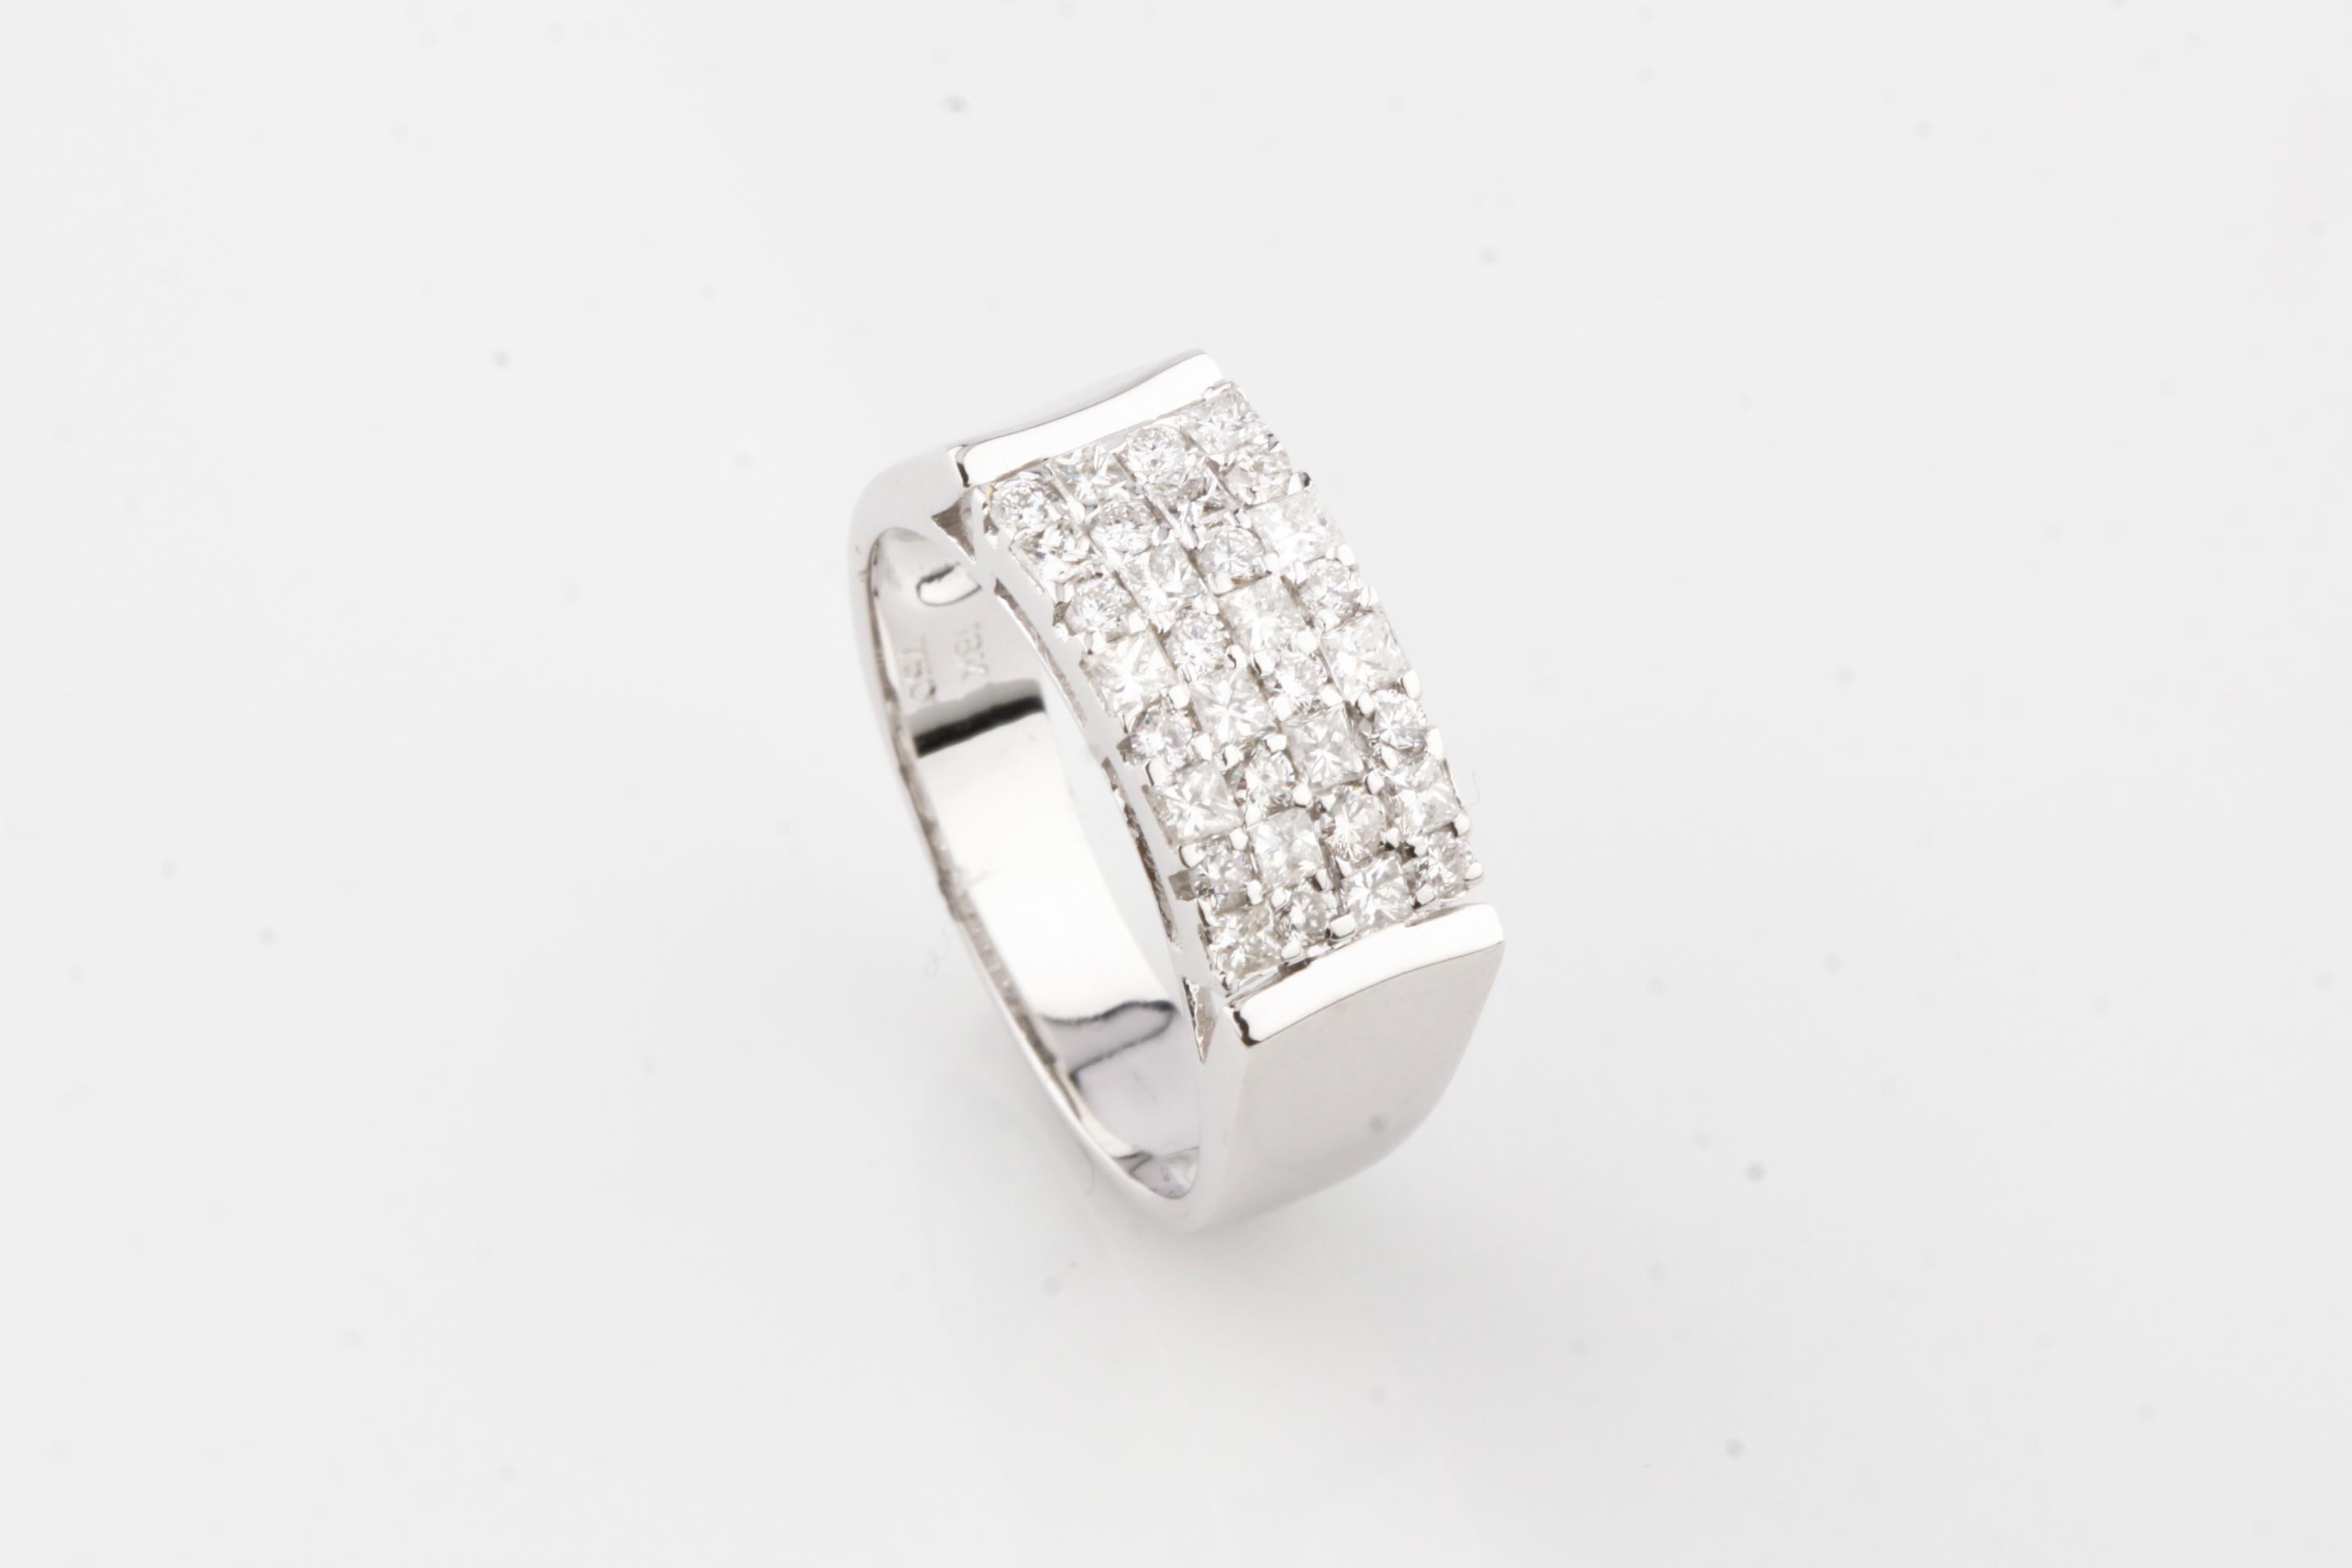 Gorgeous Plaque Ring
Features Prong-Set Rows of Princess Cut Stones
Dimensions of Plaque = 14 mm x 7 mm
Total Diamond Weight = 0.76 ct
Average Color = H
Average Clarity = SI
Total Mass = 5.3 grams
Size 6.5
Gorgeous Gift!